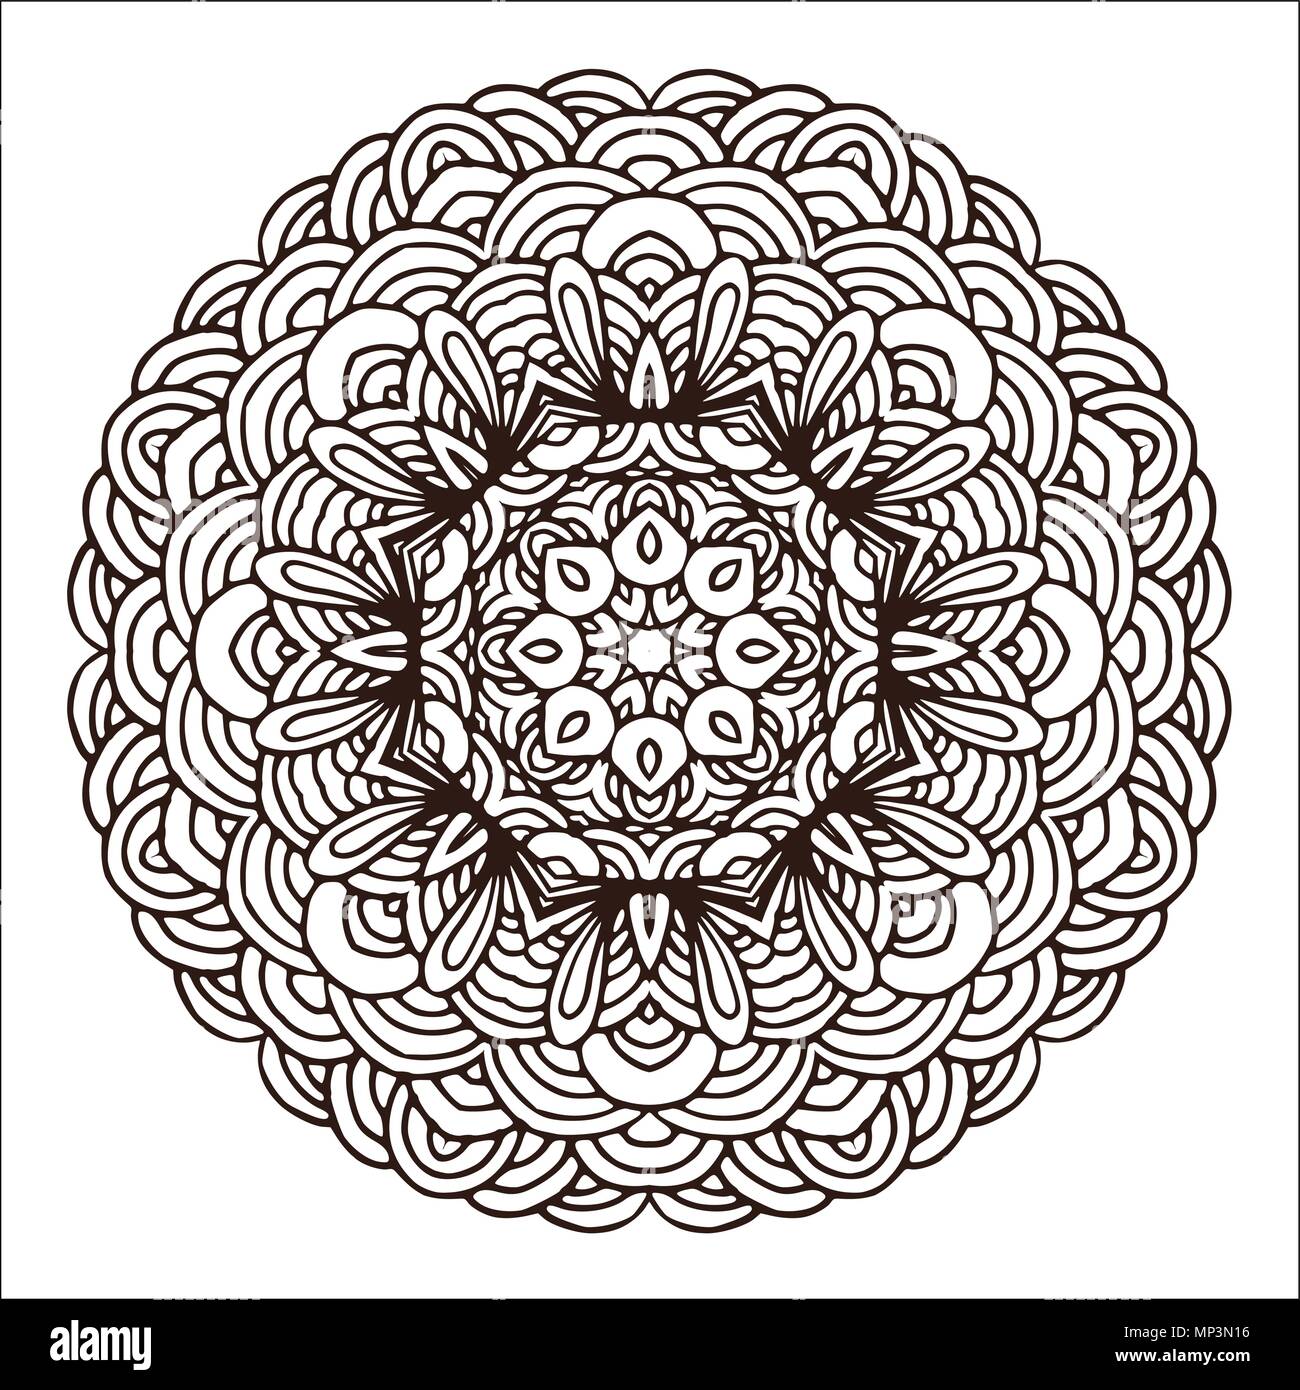 Hand drawn mandala colorful. Geometric round motive for design, invitation cards and elements for yoga etc. Stock Vector